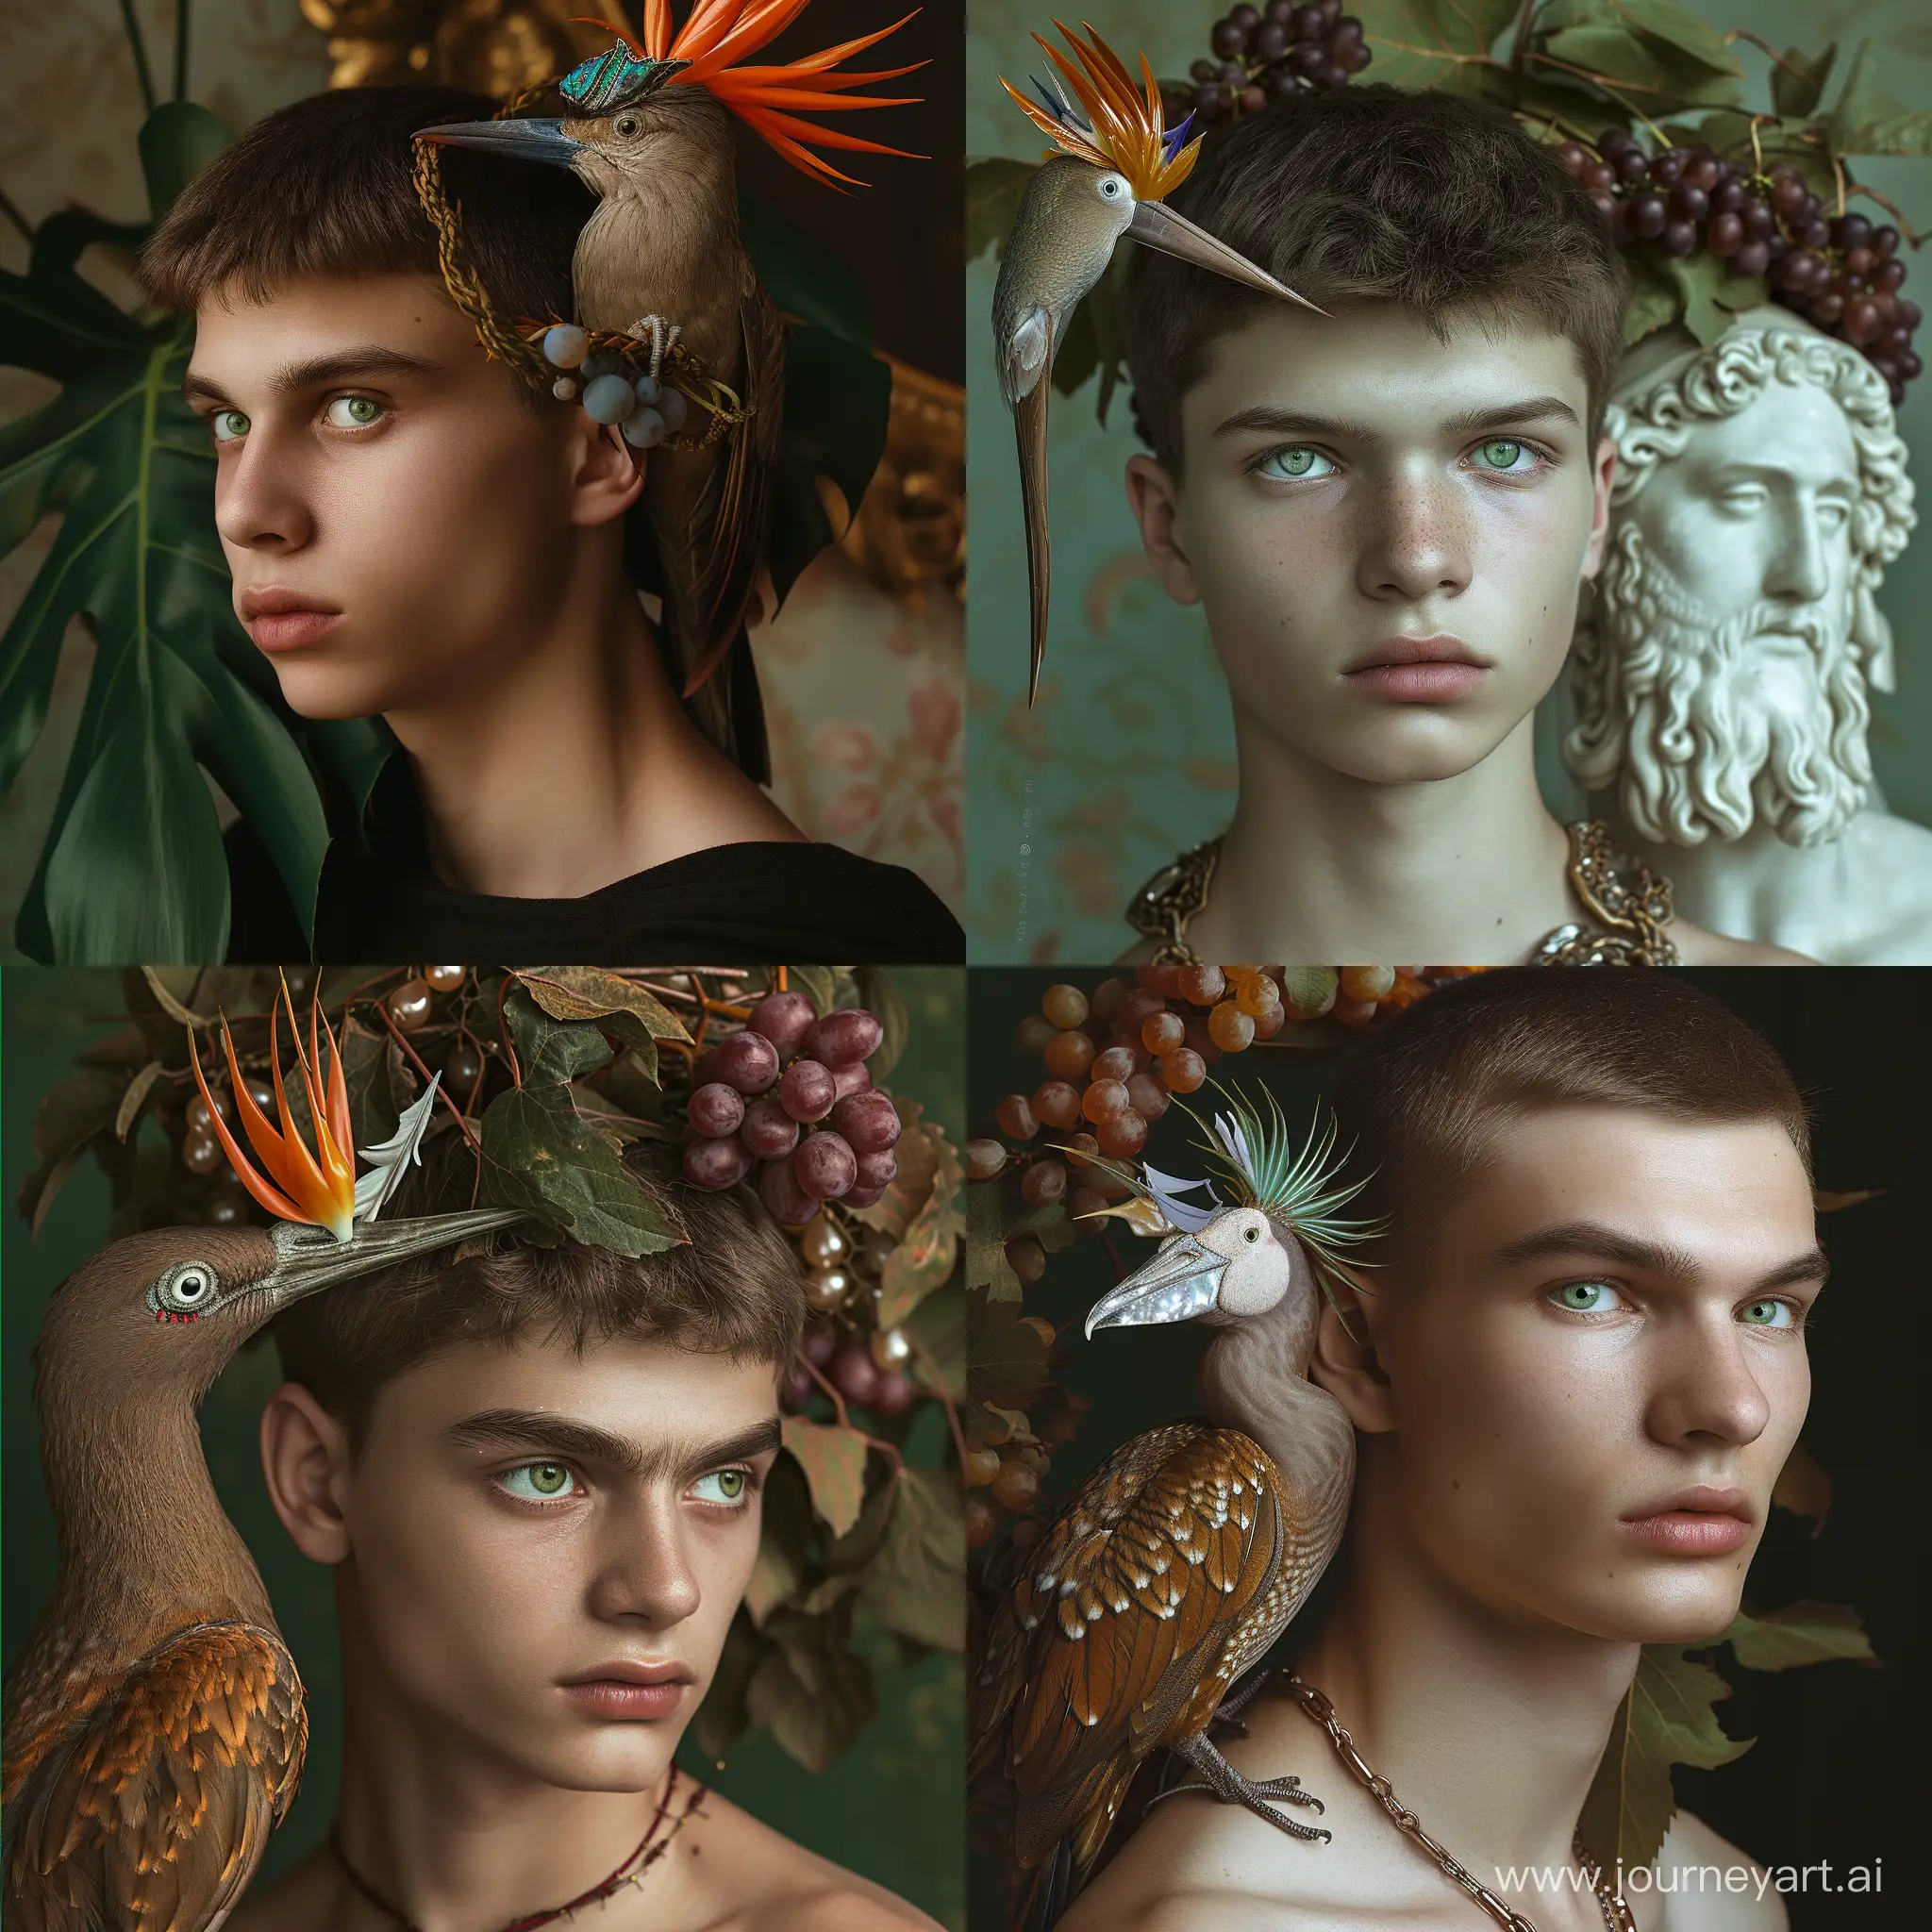 RAW photo. Long Shot. A slender 20-year-old guy, gray-green eyes, elongated oval face, brown hair, short haircut, Slavic type of appearance, a bird of paradise with mother-of-pearl plumage sits on his shoulder, the image of Dionysus with a wreath of grapes framing his head, high detail, realism, fashion photo shoot, hyperrealism, Canon photography, imperfect skin